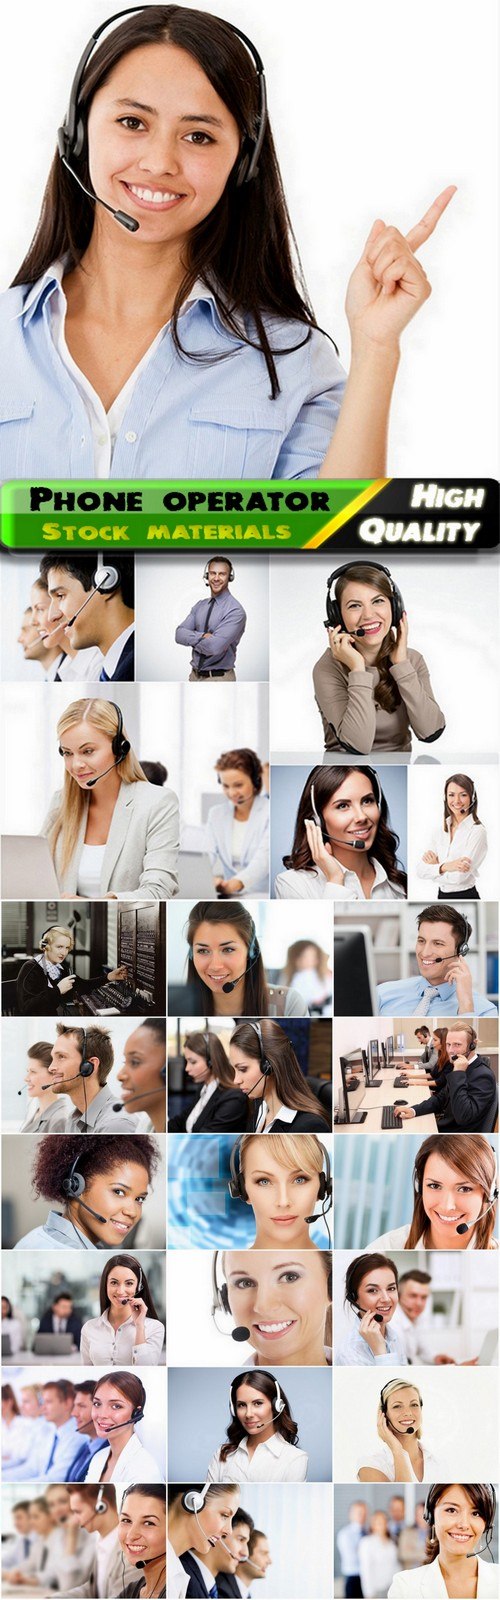 Phone operator and support service - 25 HQ Jpg